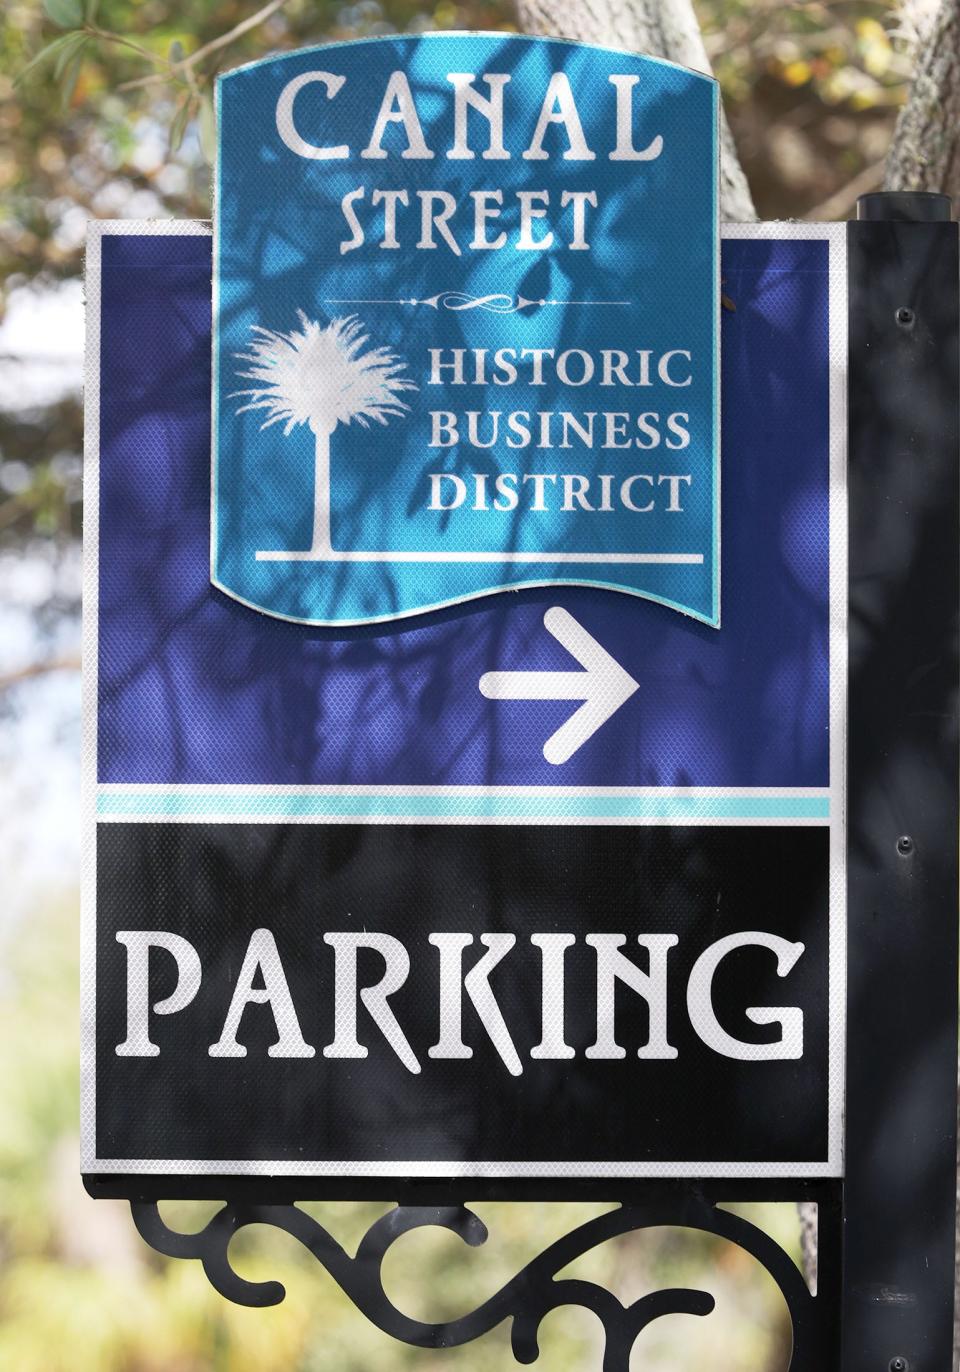 A public parking sign for a Canal Street parking lot, Friday, Feb. 10, 2023, in New Smyrna Beach.